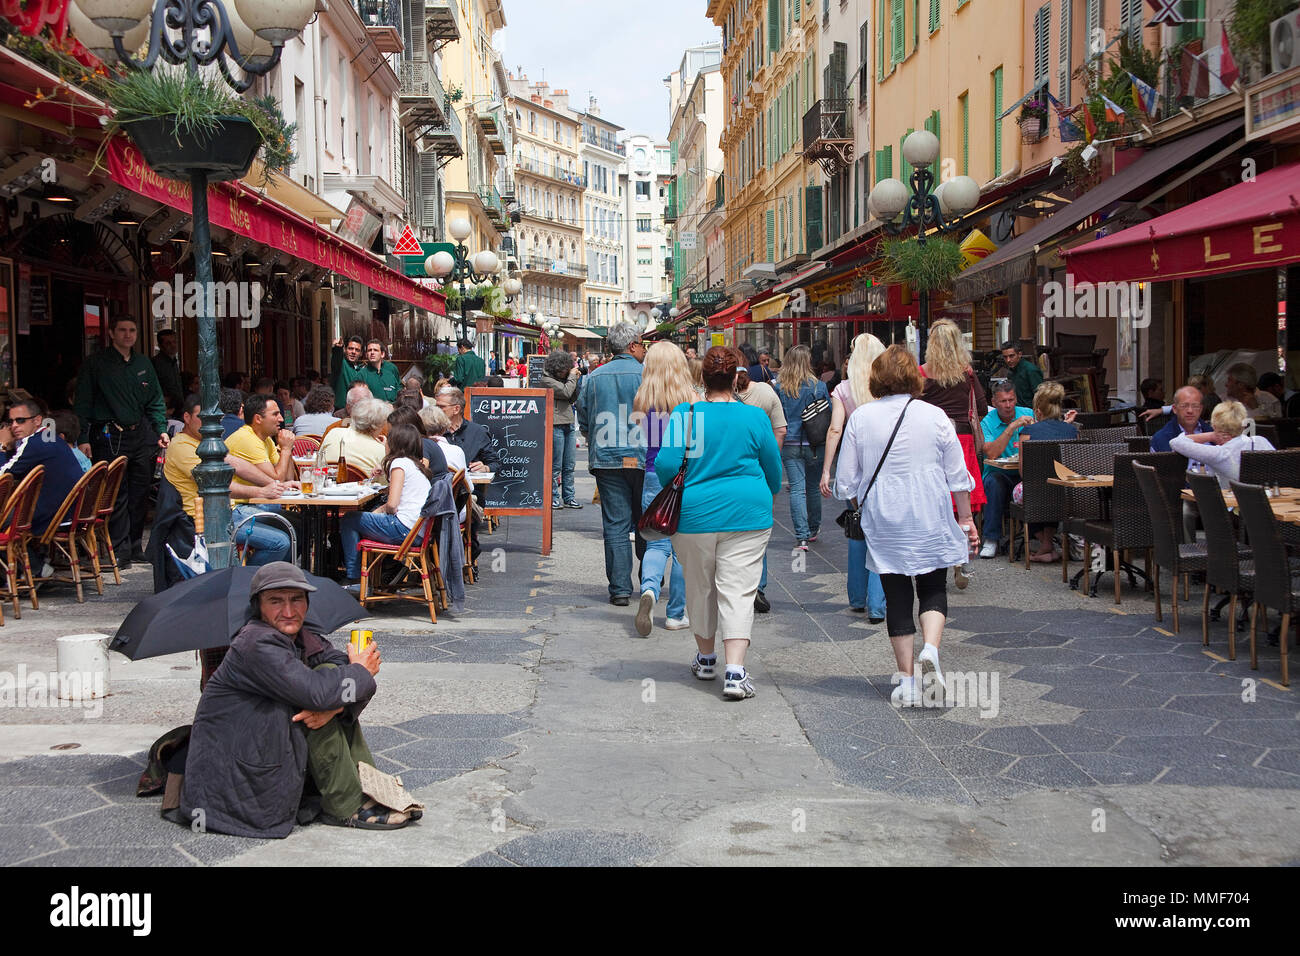 Homeless person begs at pedestrian area, Nice, Côte d’Azur, Alpes-Maritimes, South France, France, Europe Stock Photo